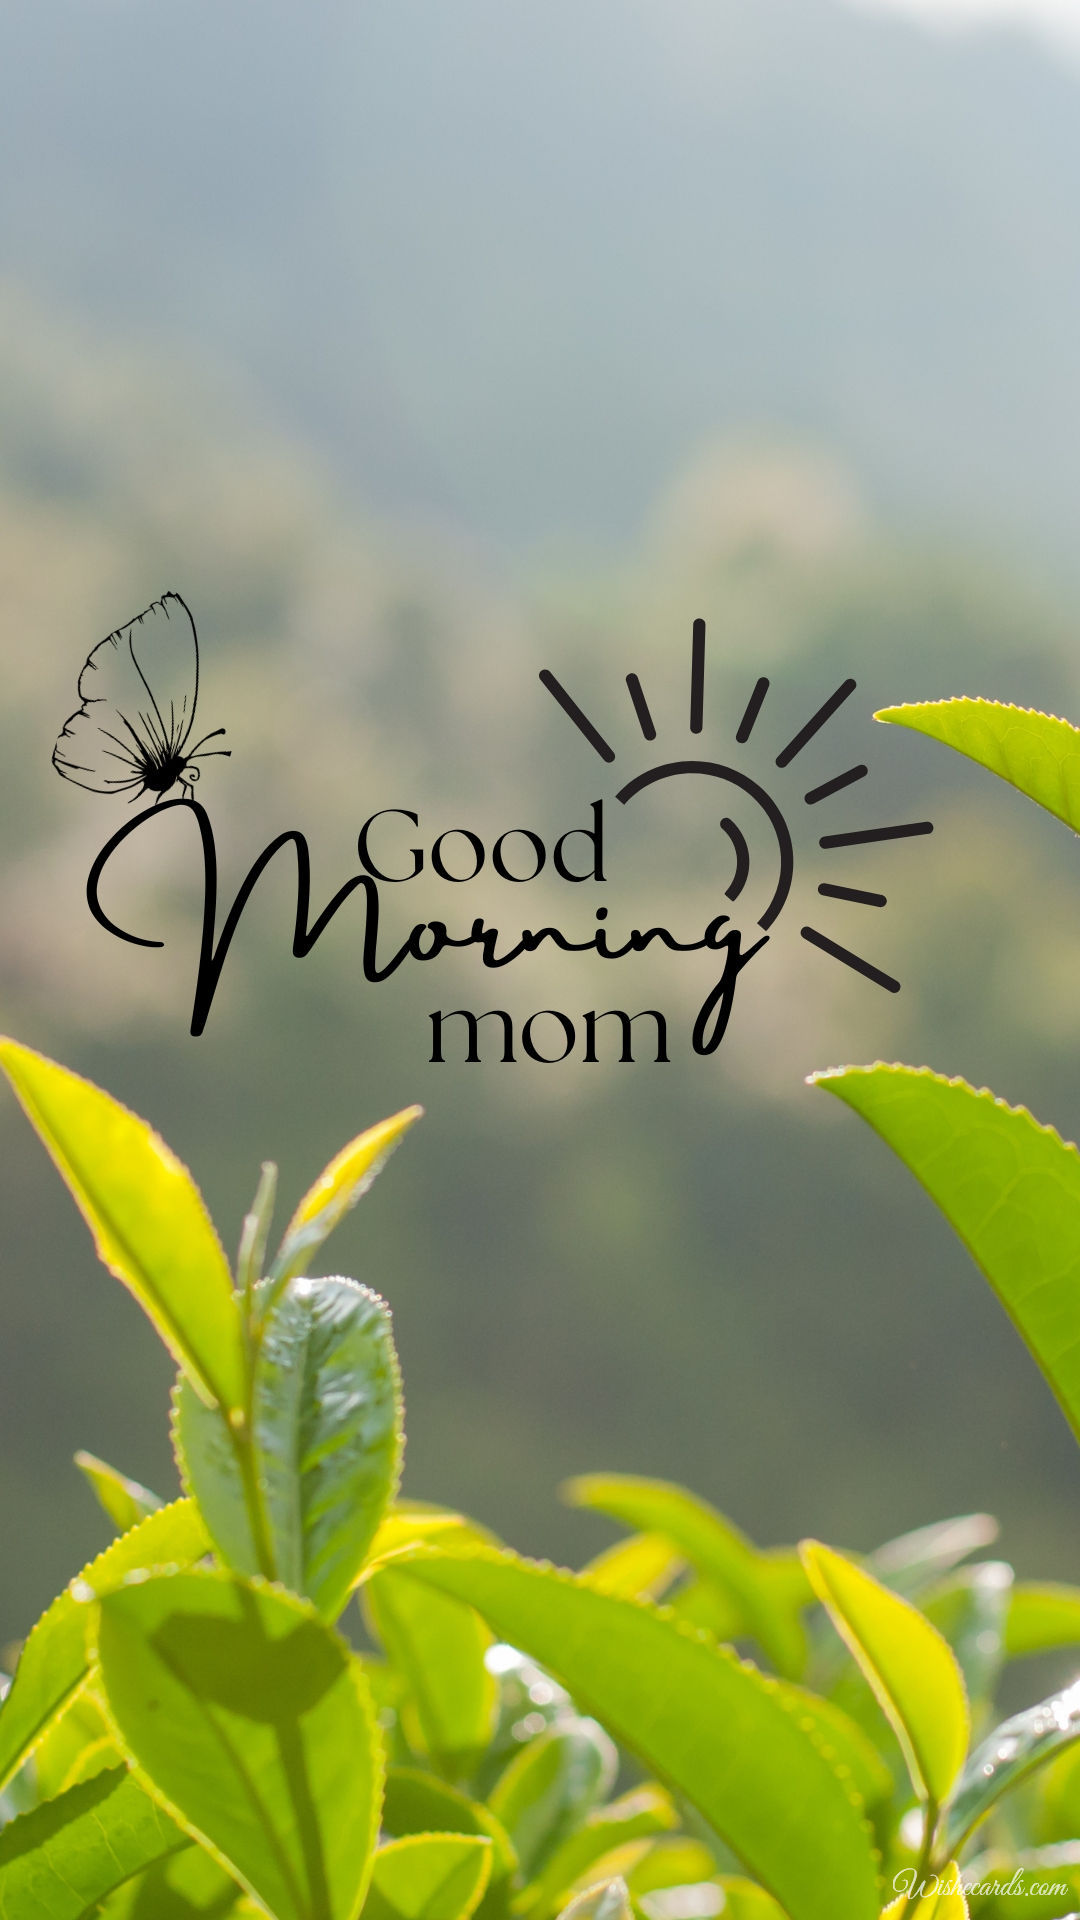 Good Morning Image for Mother